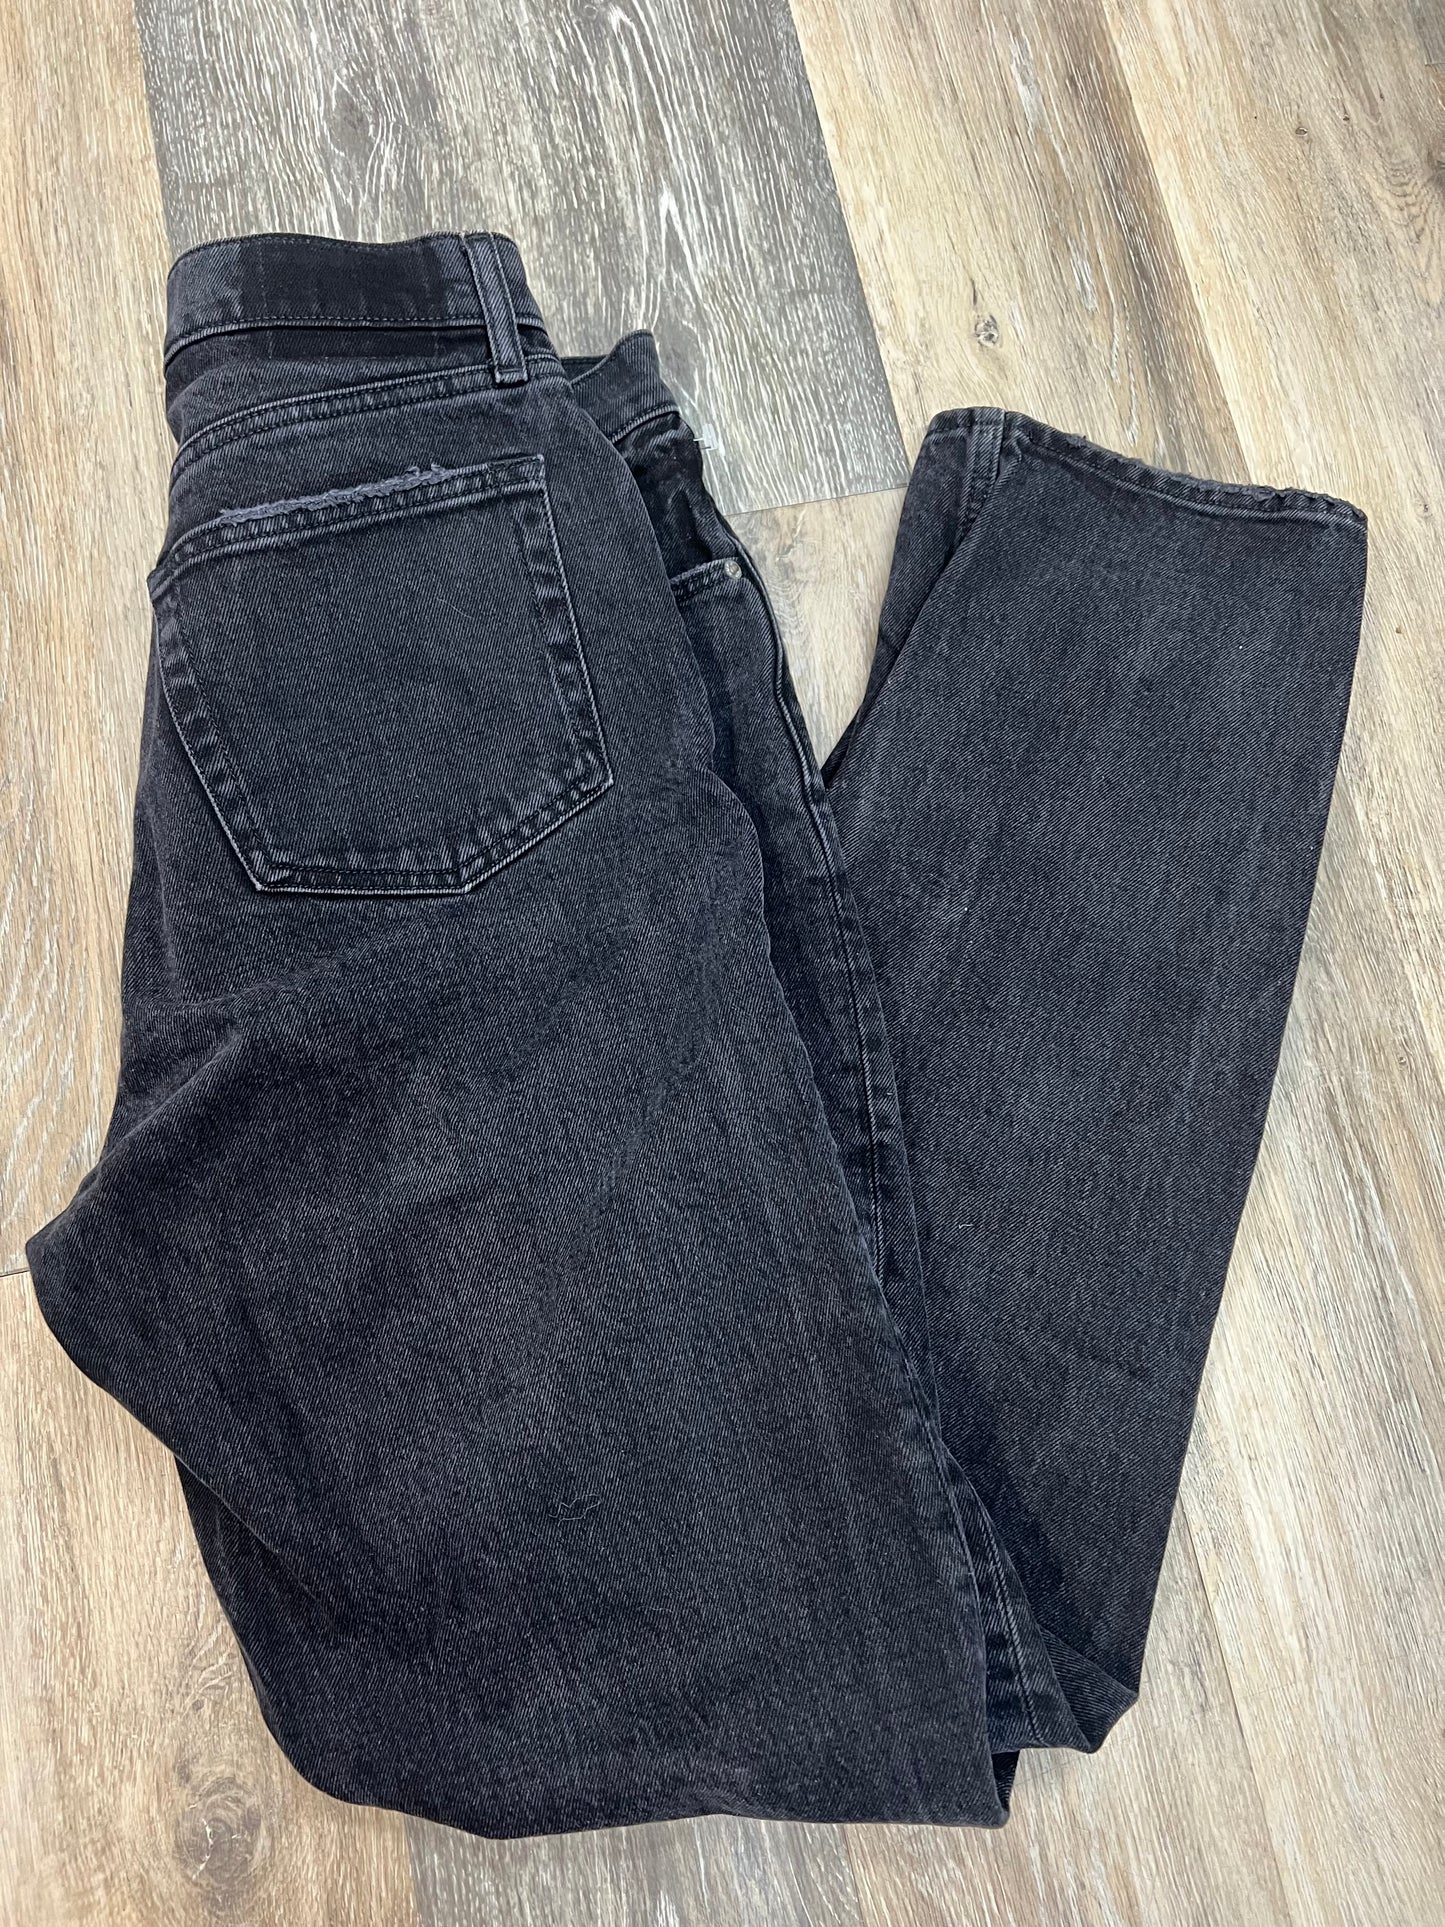 Jeans Straight By Abercrombie And Fitch  Size: 8l